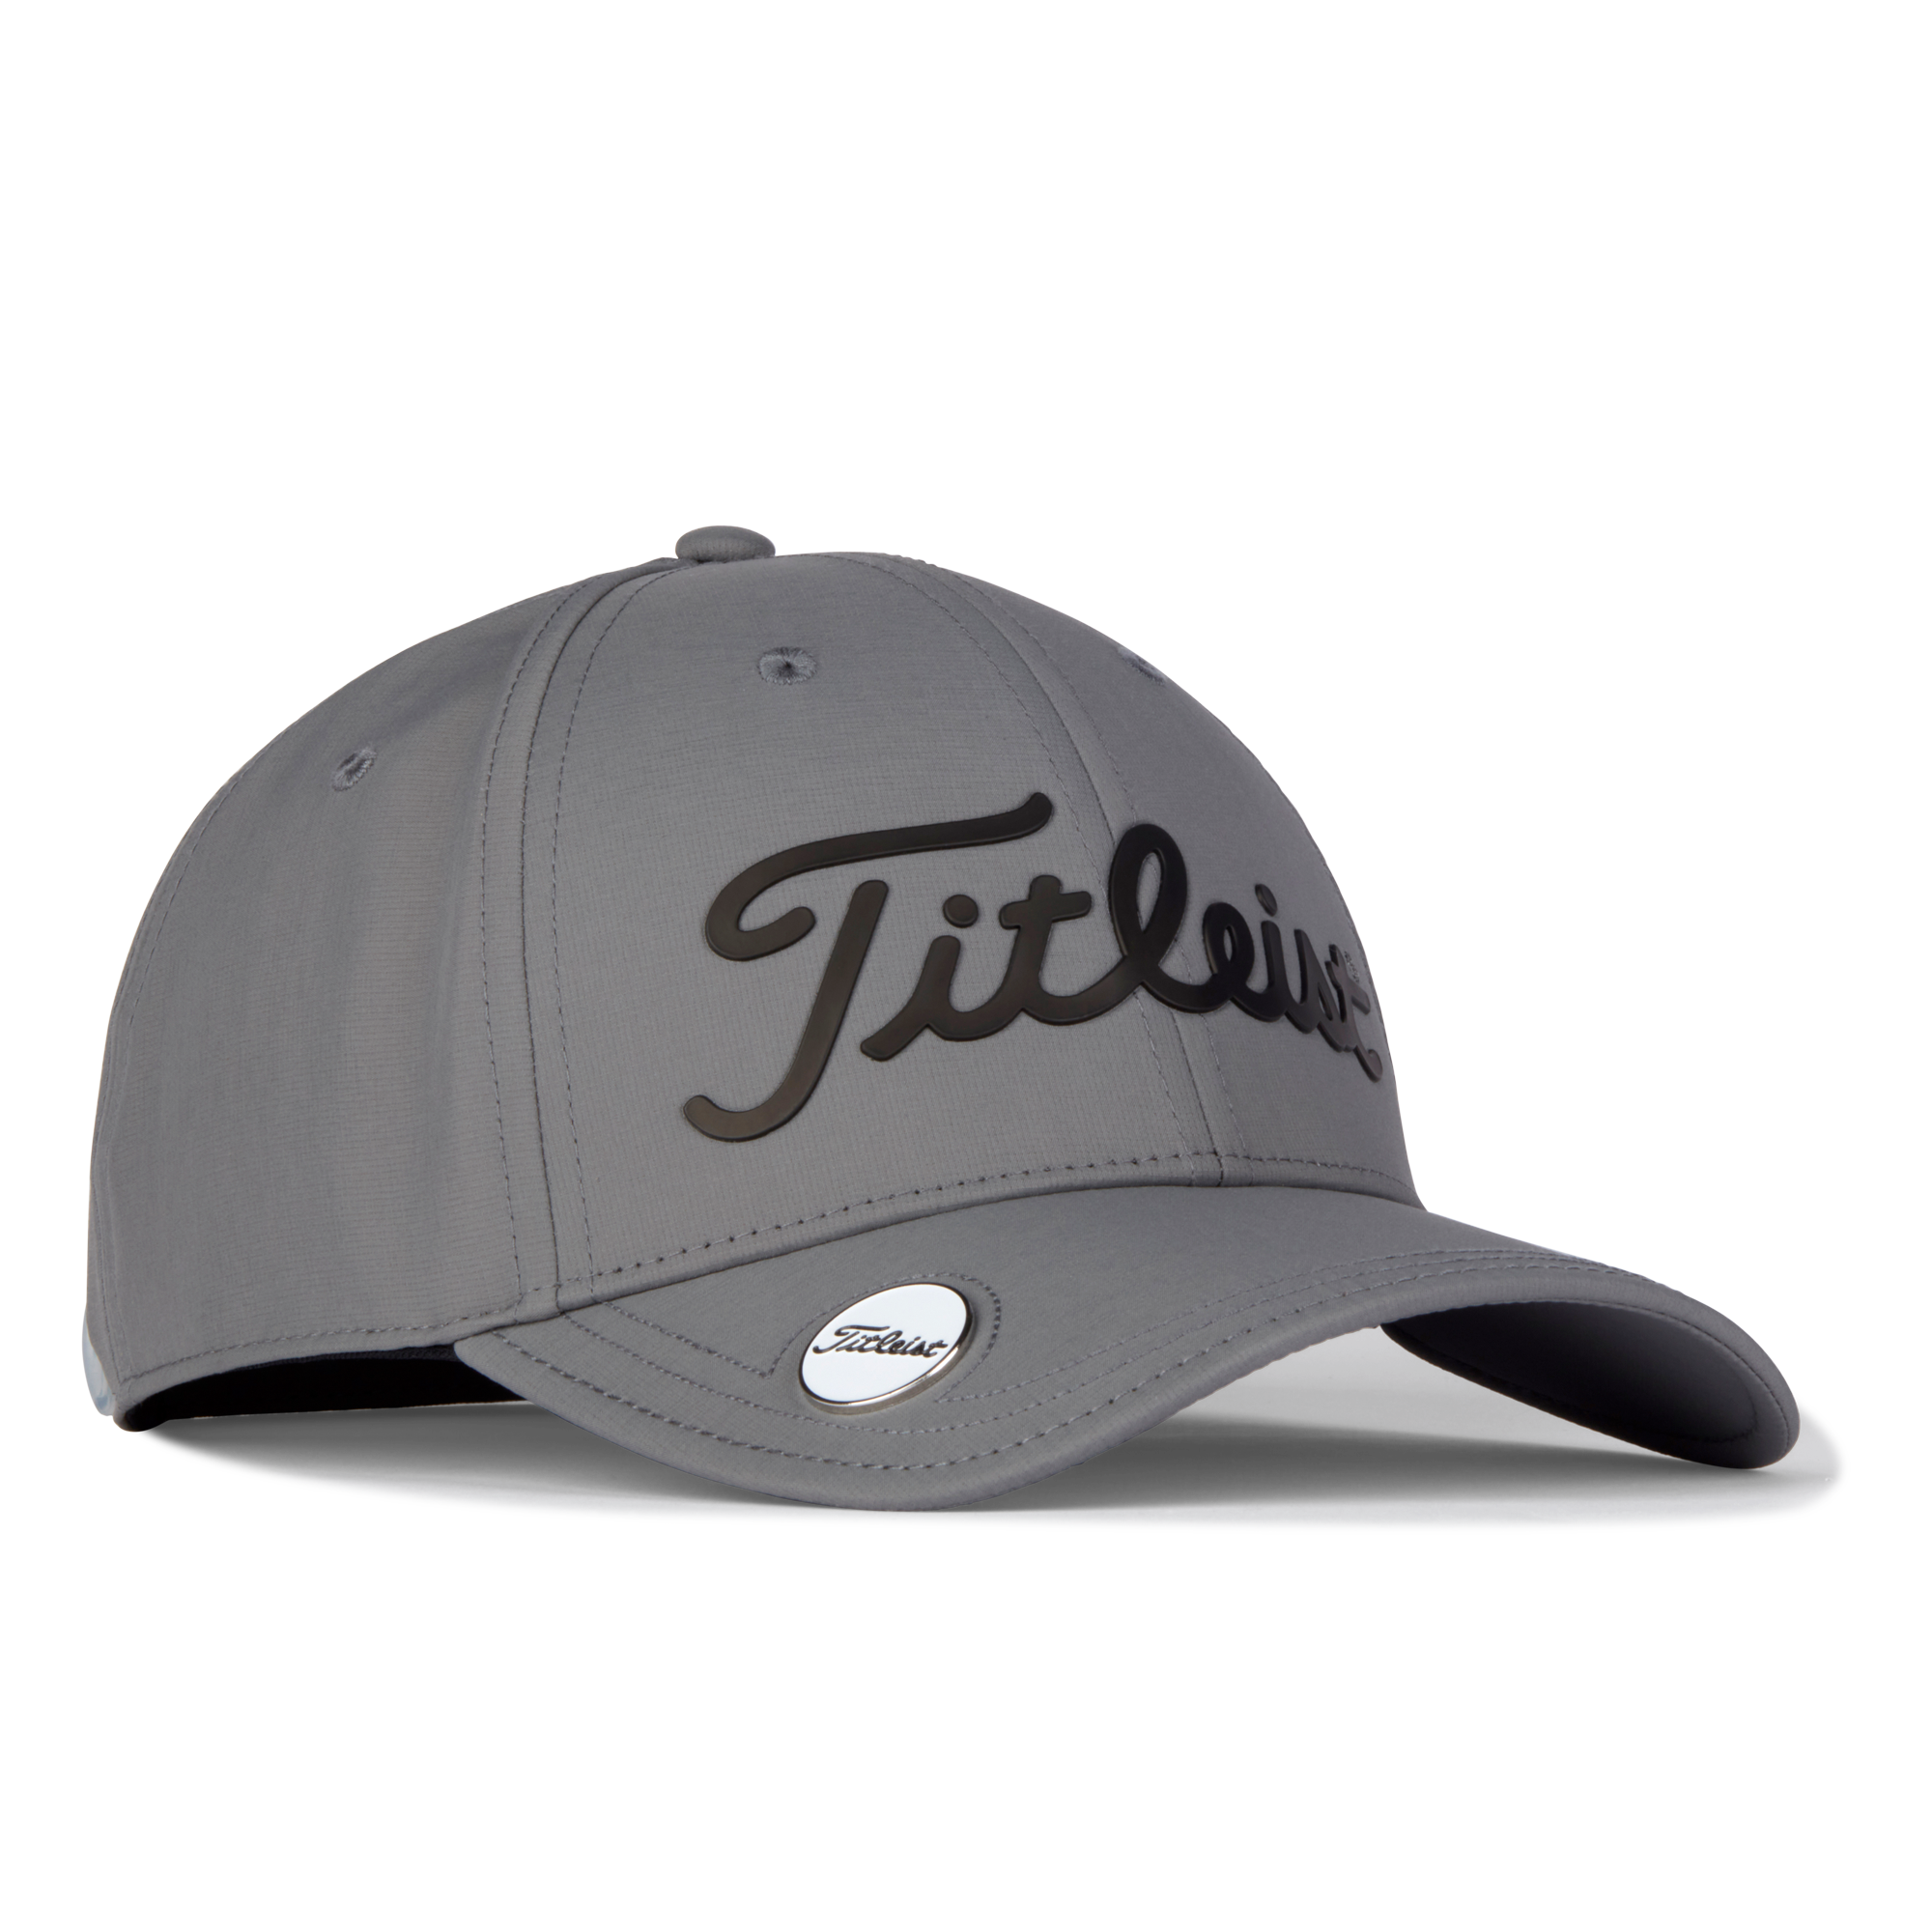 Titleist Official Players Performance Ball Marker in Charcoal/Black